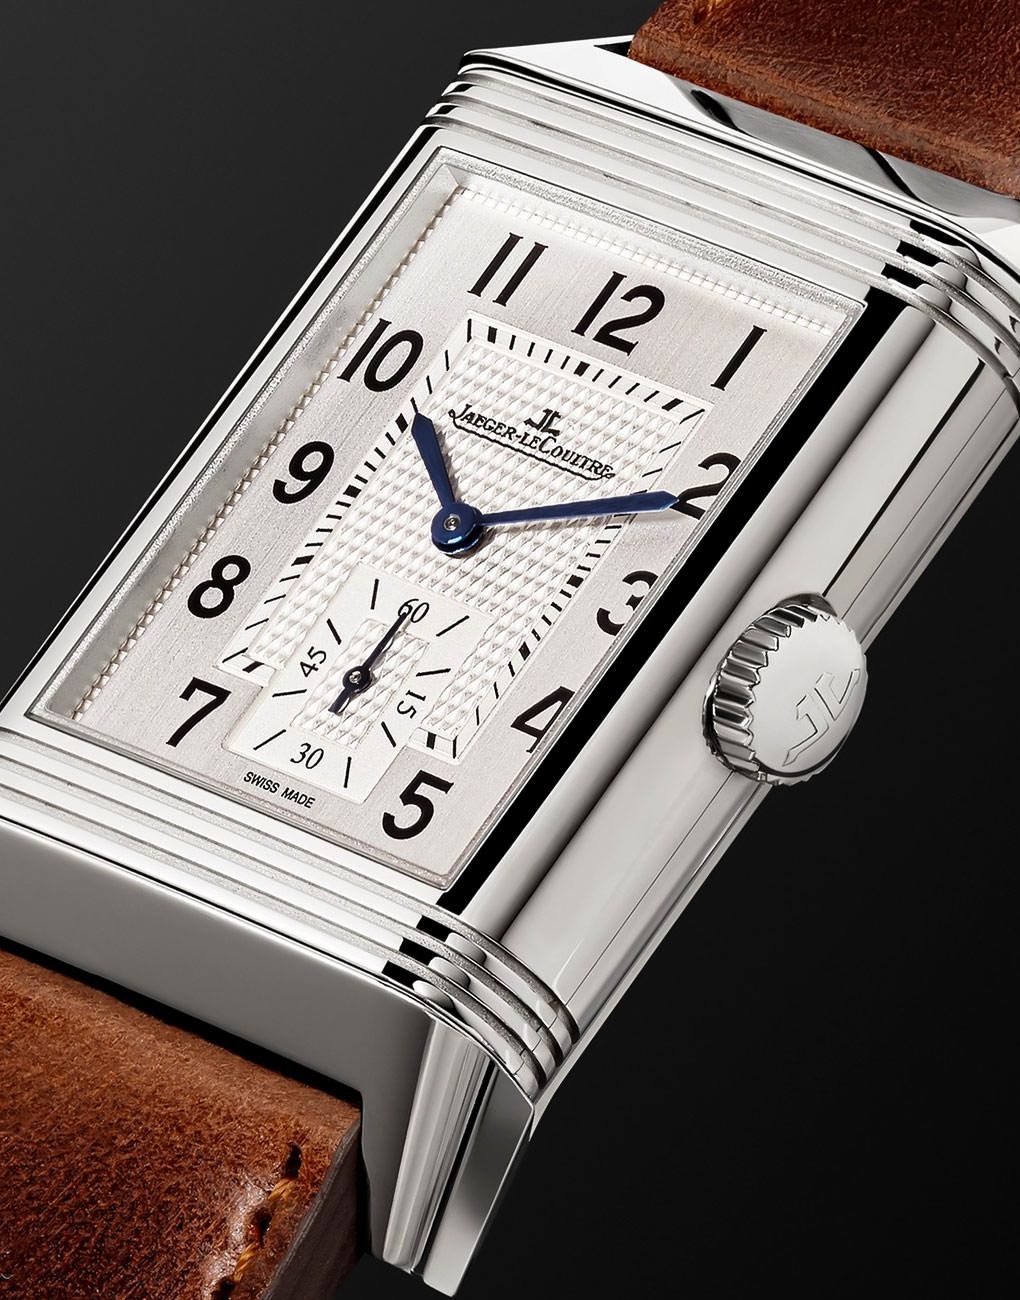 Louis Erard Makes Traditional, Hand-Executed Guilloche Affordable